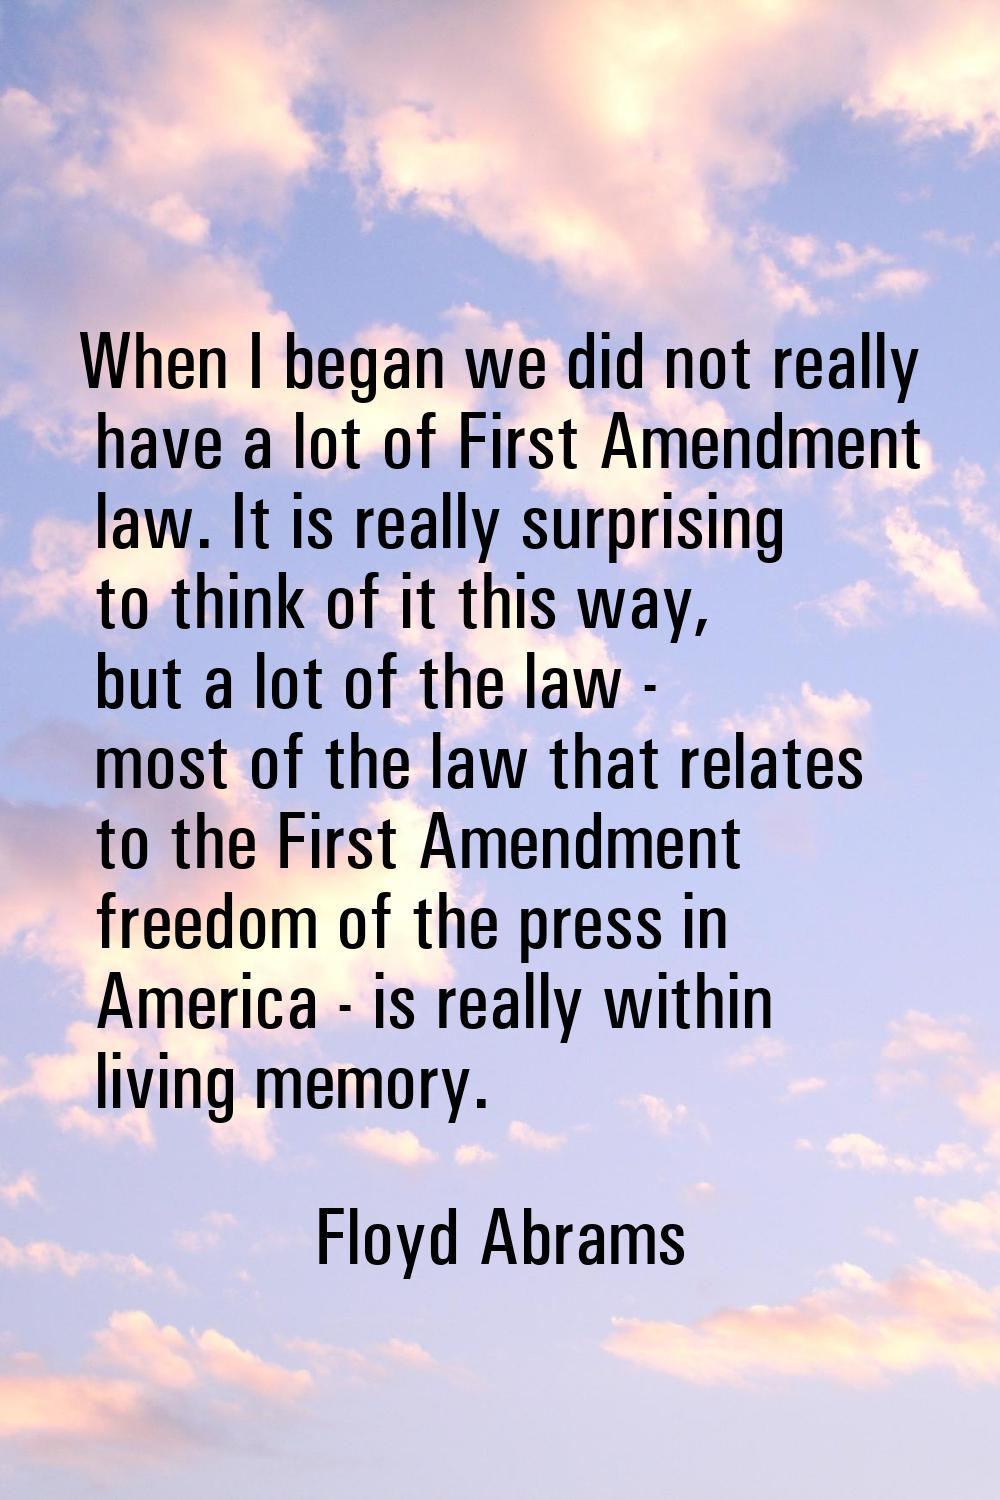 When I began we did not really have a lot of First Amendment law. It is really surprising to think 